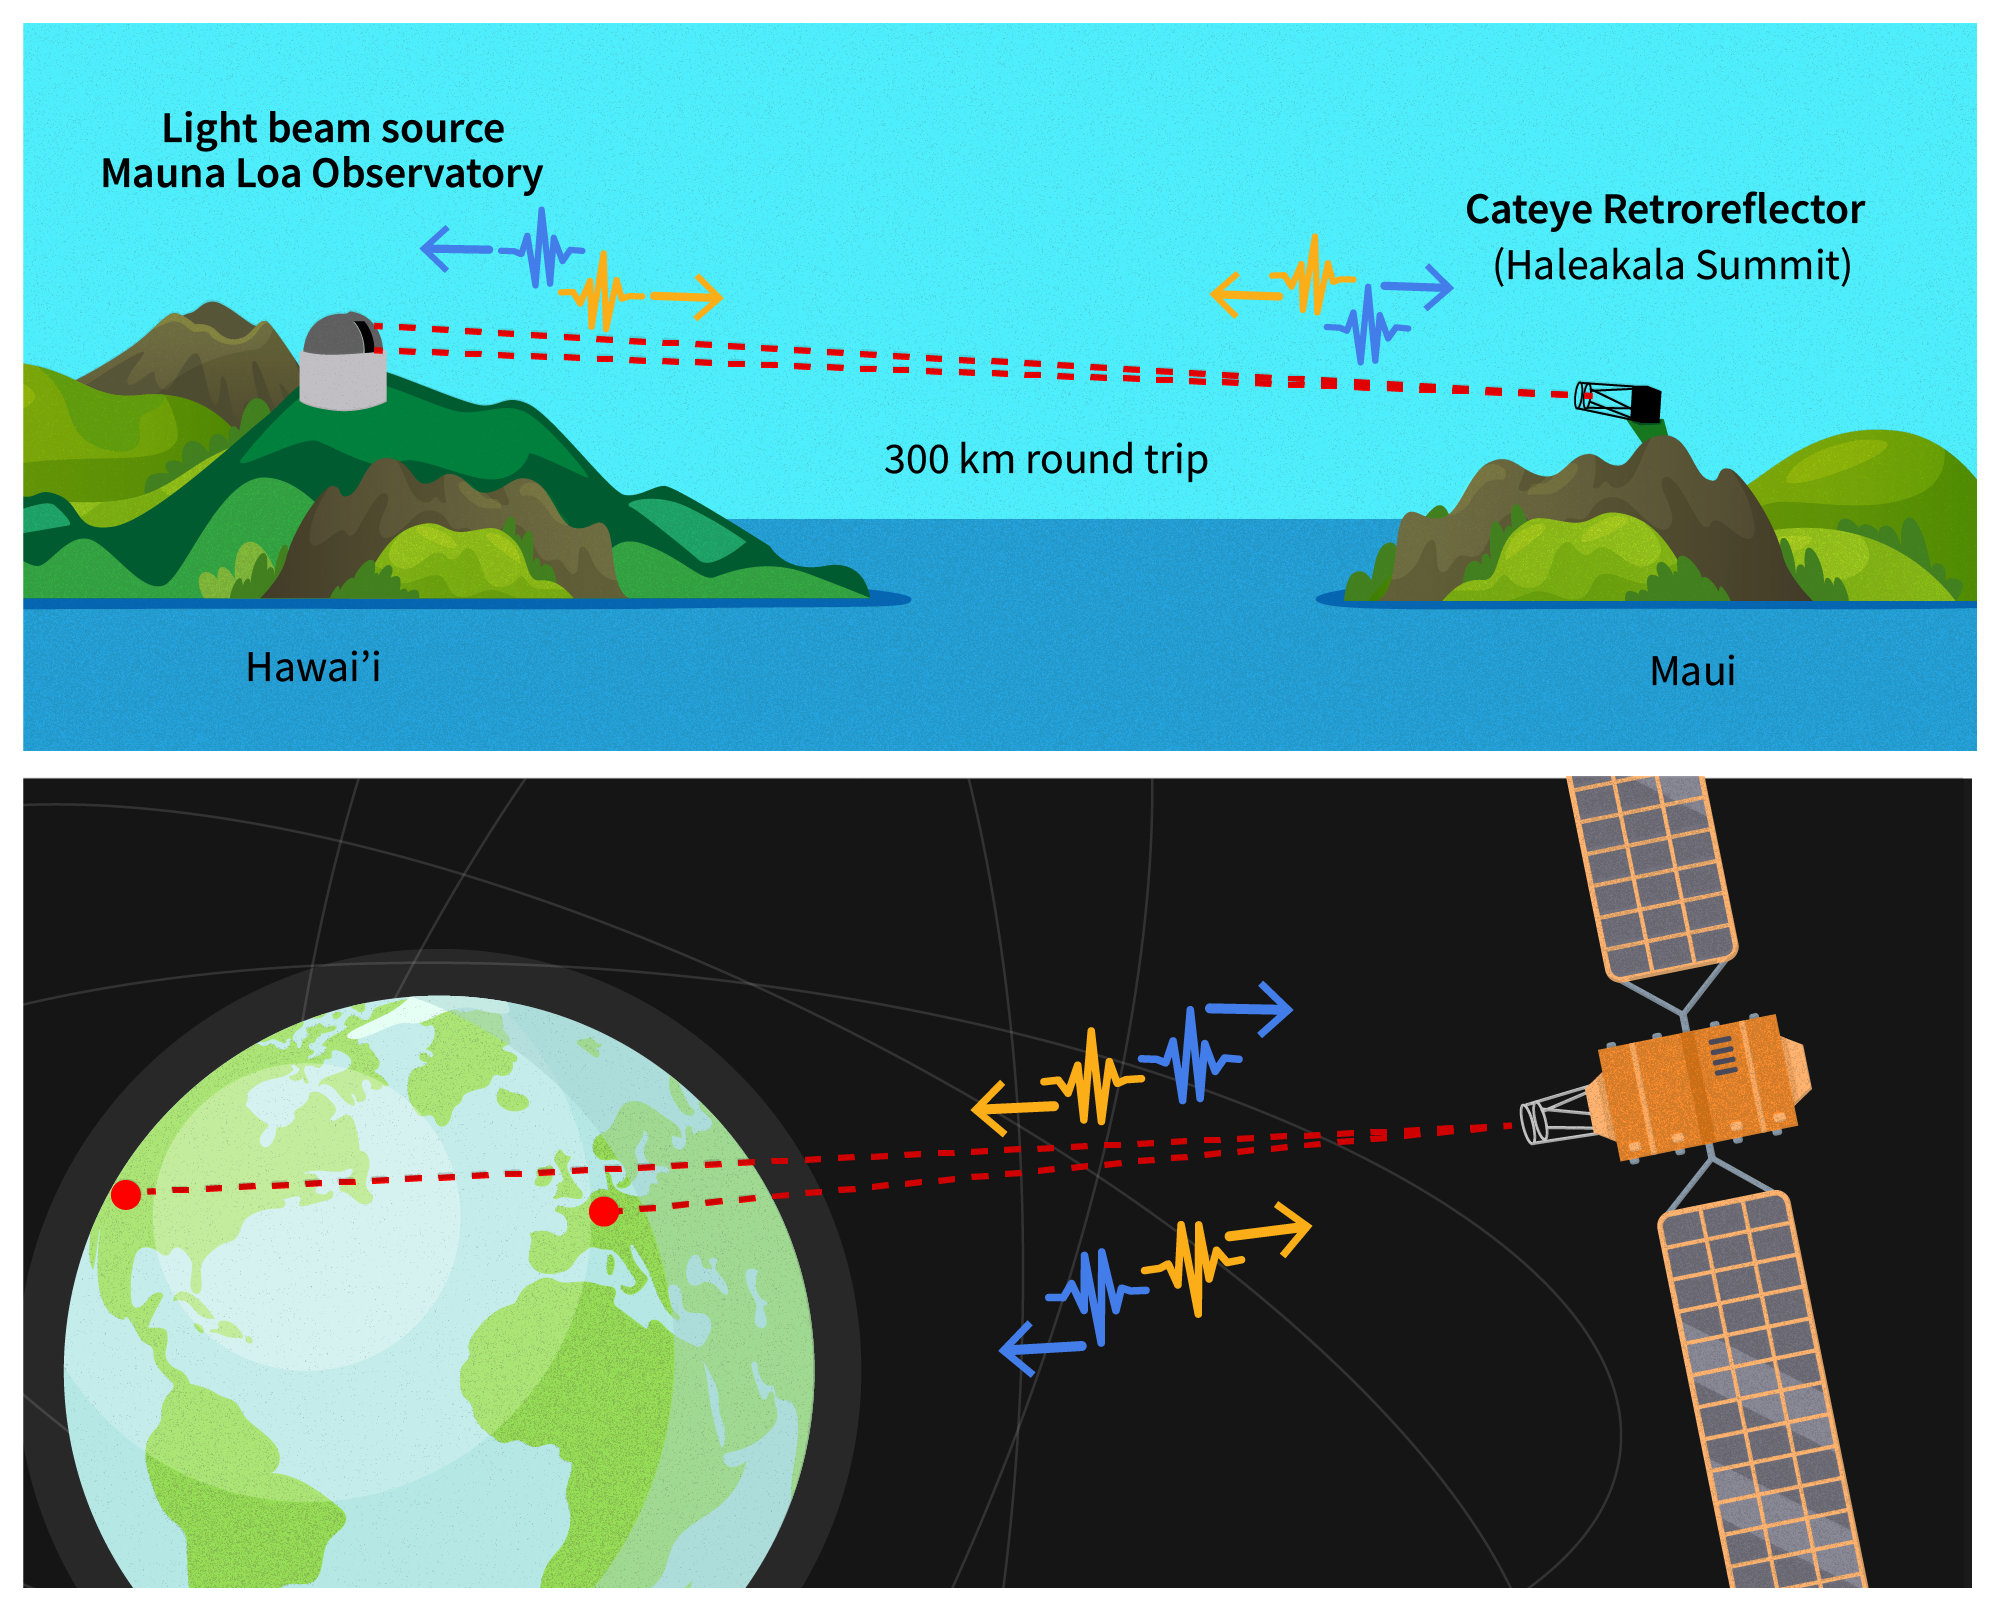 NIST Lays Groundwork for Future Ultra-Precise Timing Links to Geosynchronous Satellites